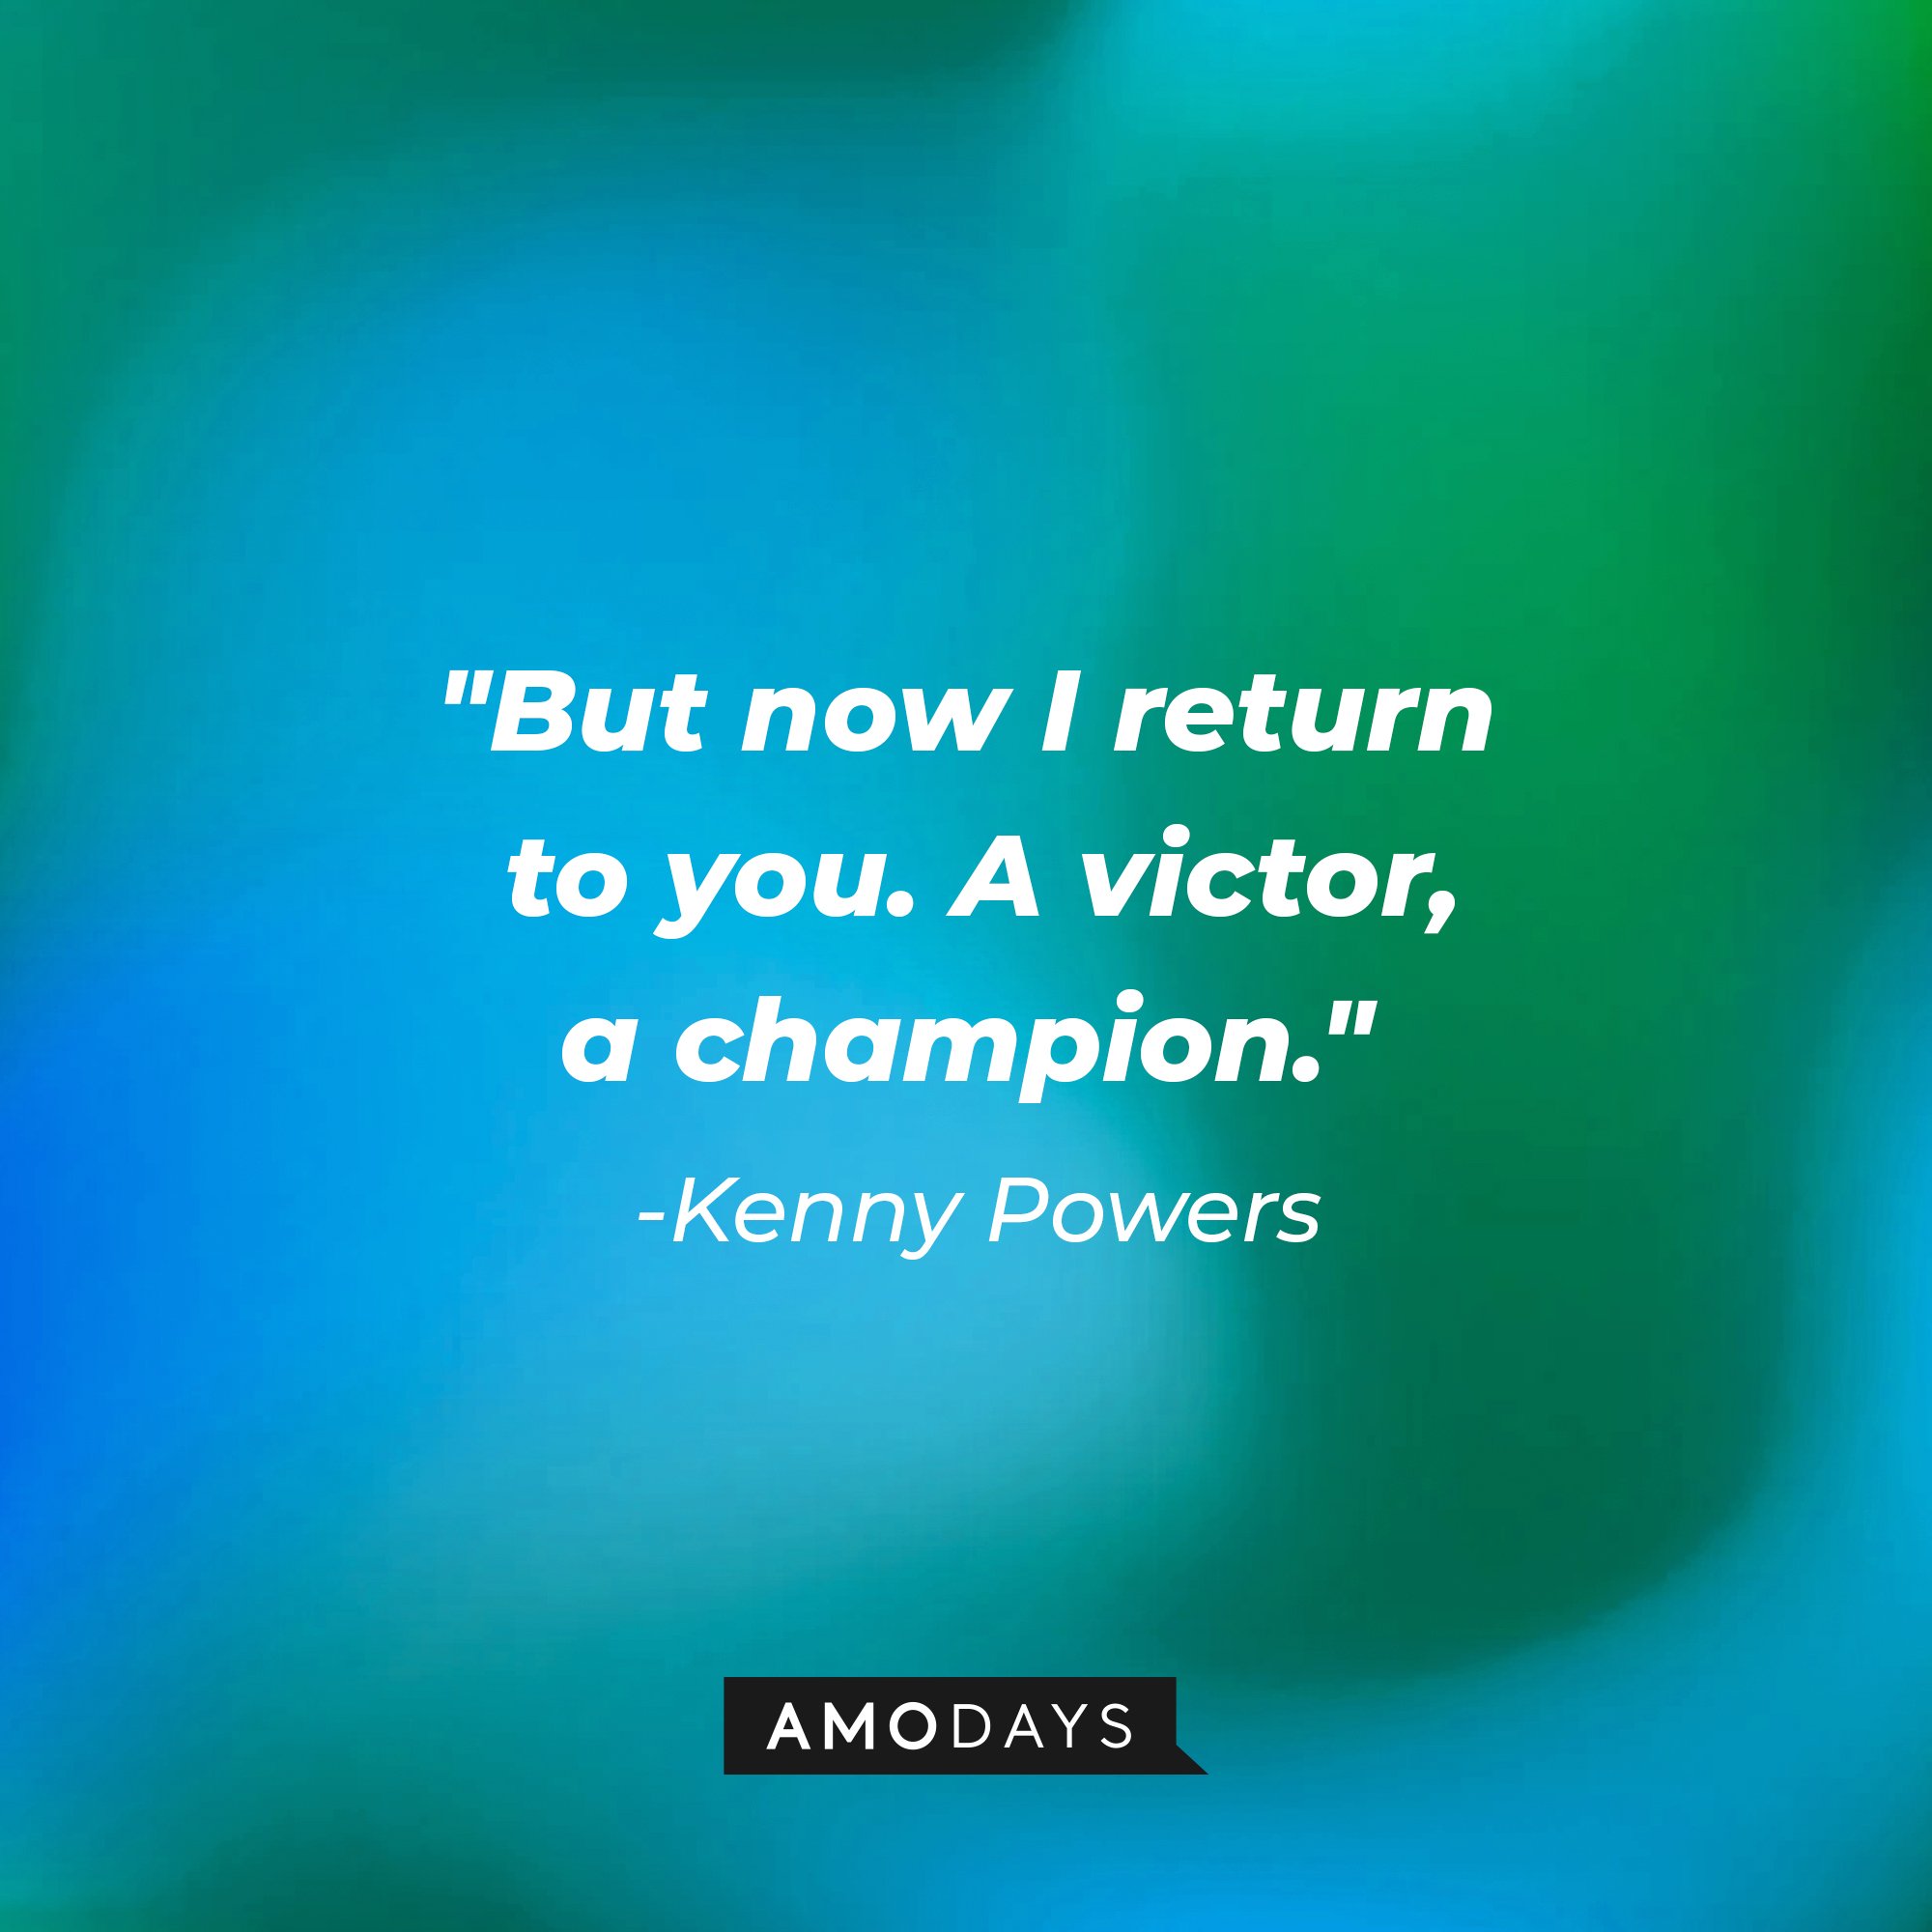 Kenny Powers' quote: "But now I return to you. A victor, a champion." | Image: AmoDays